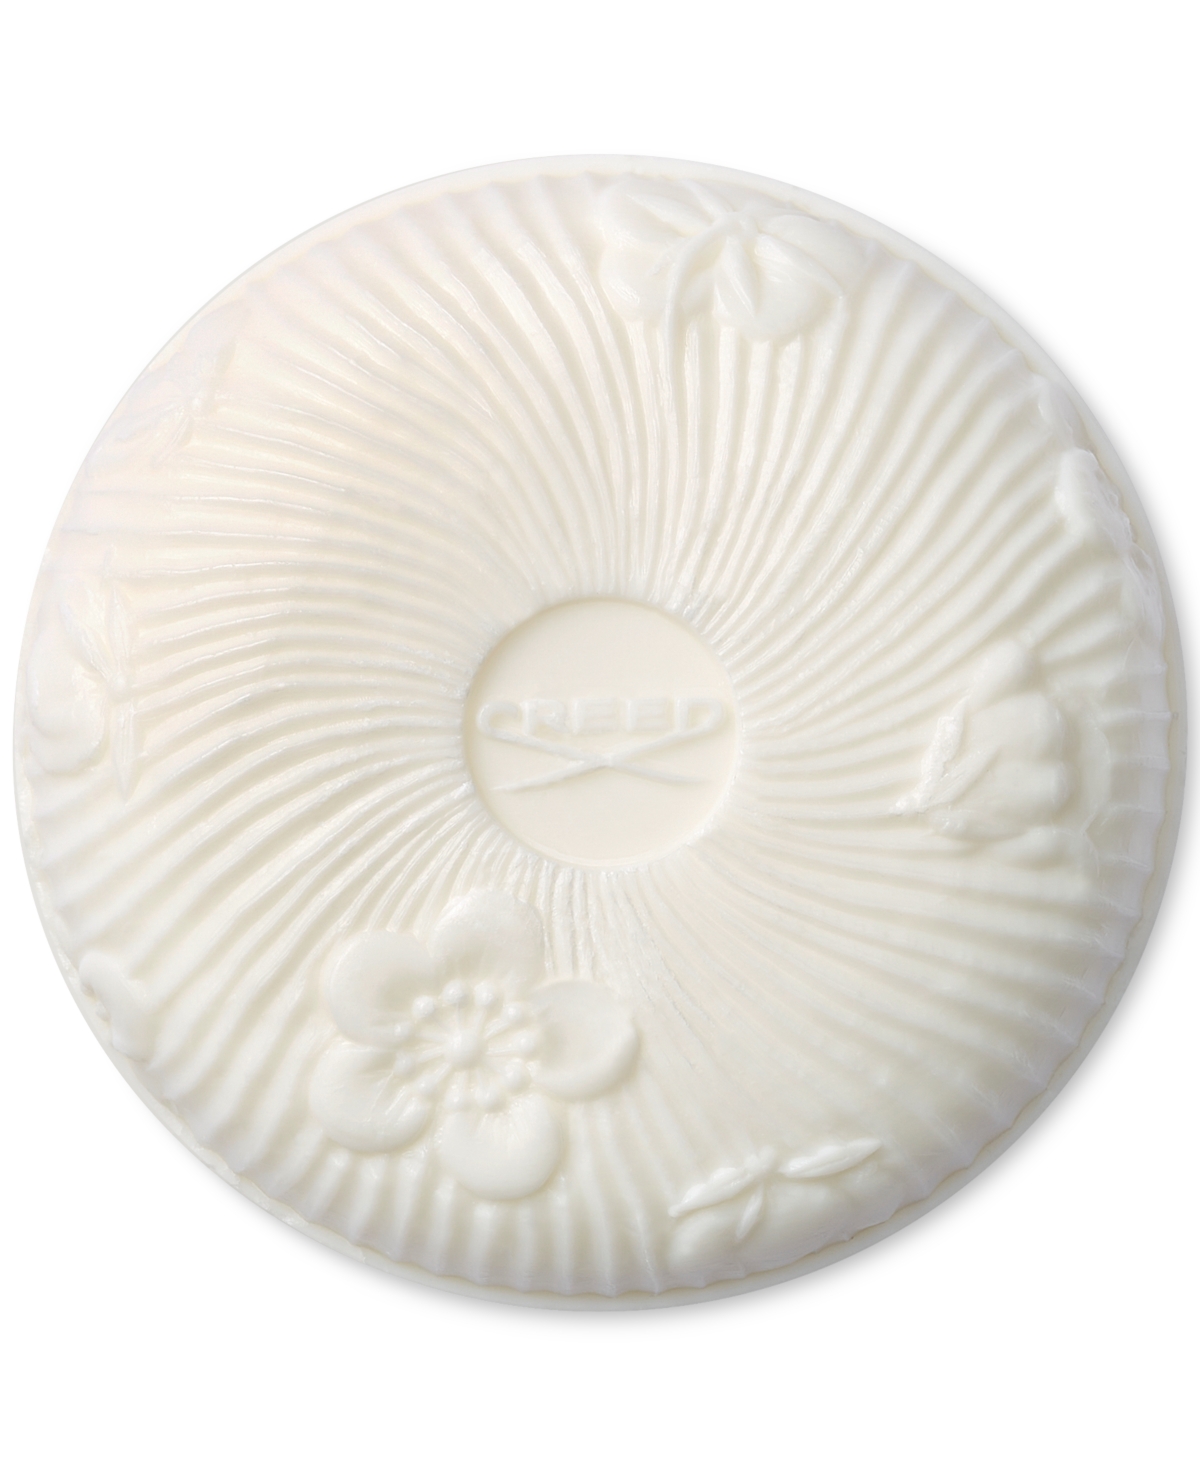 Creed Love In White Perfumed Soap, 5.2 Oz. In No Color